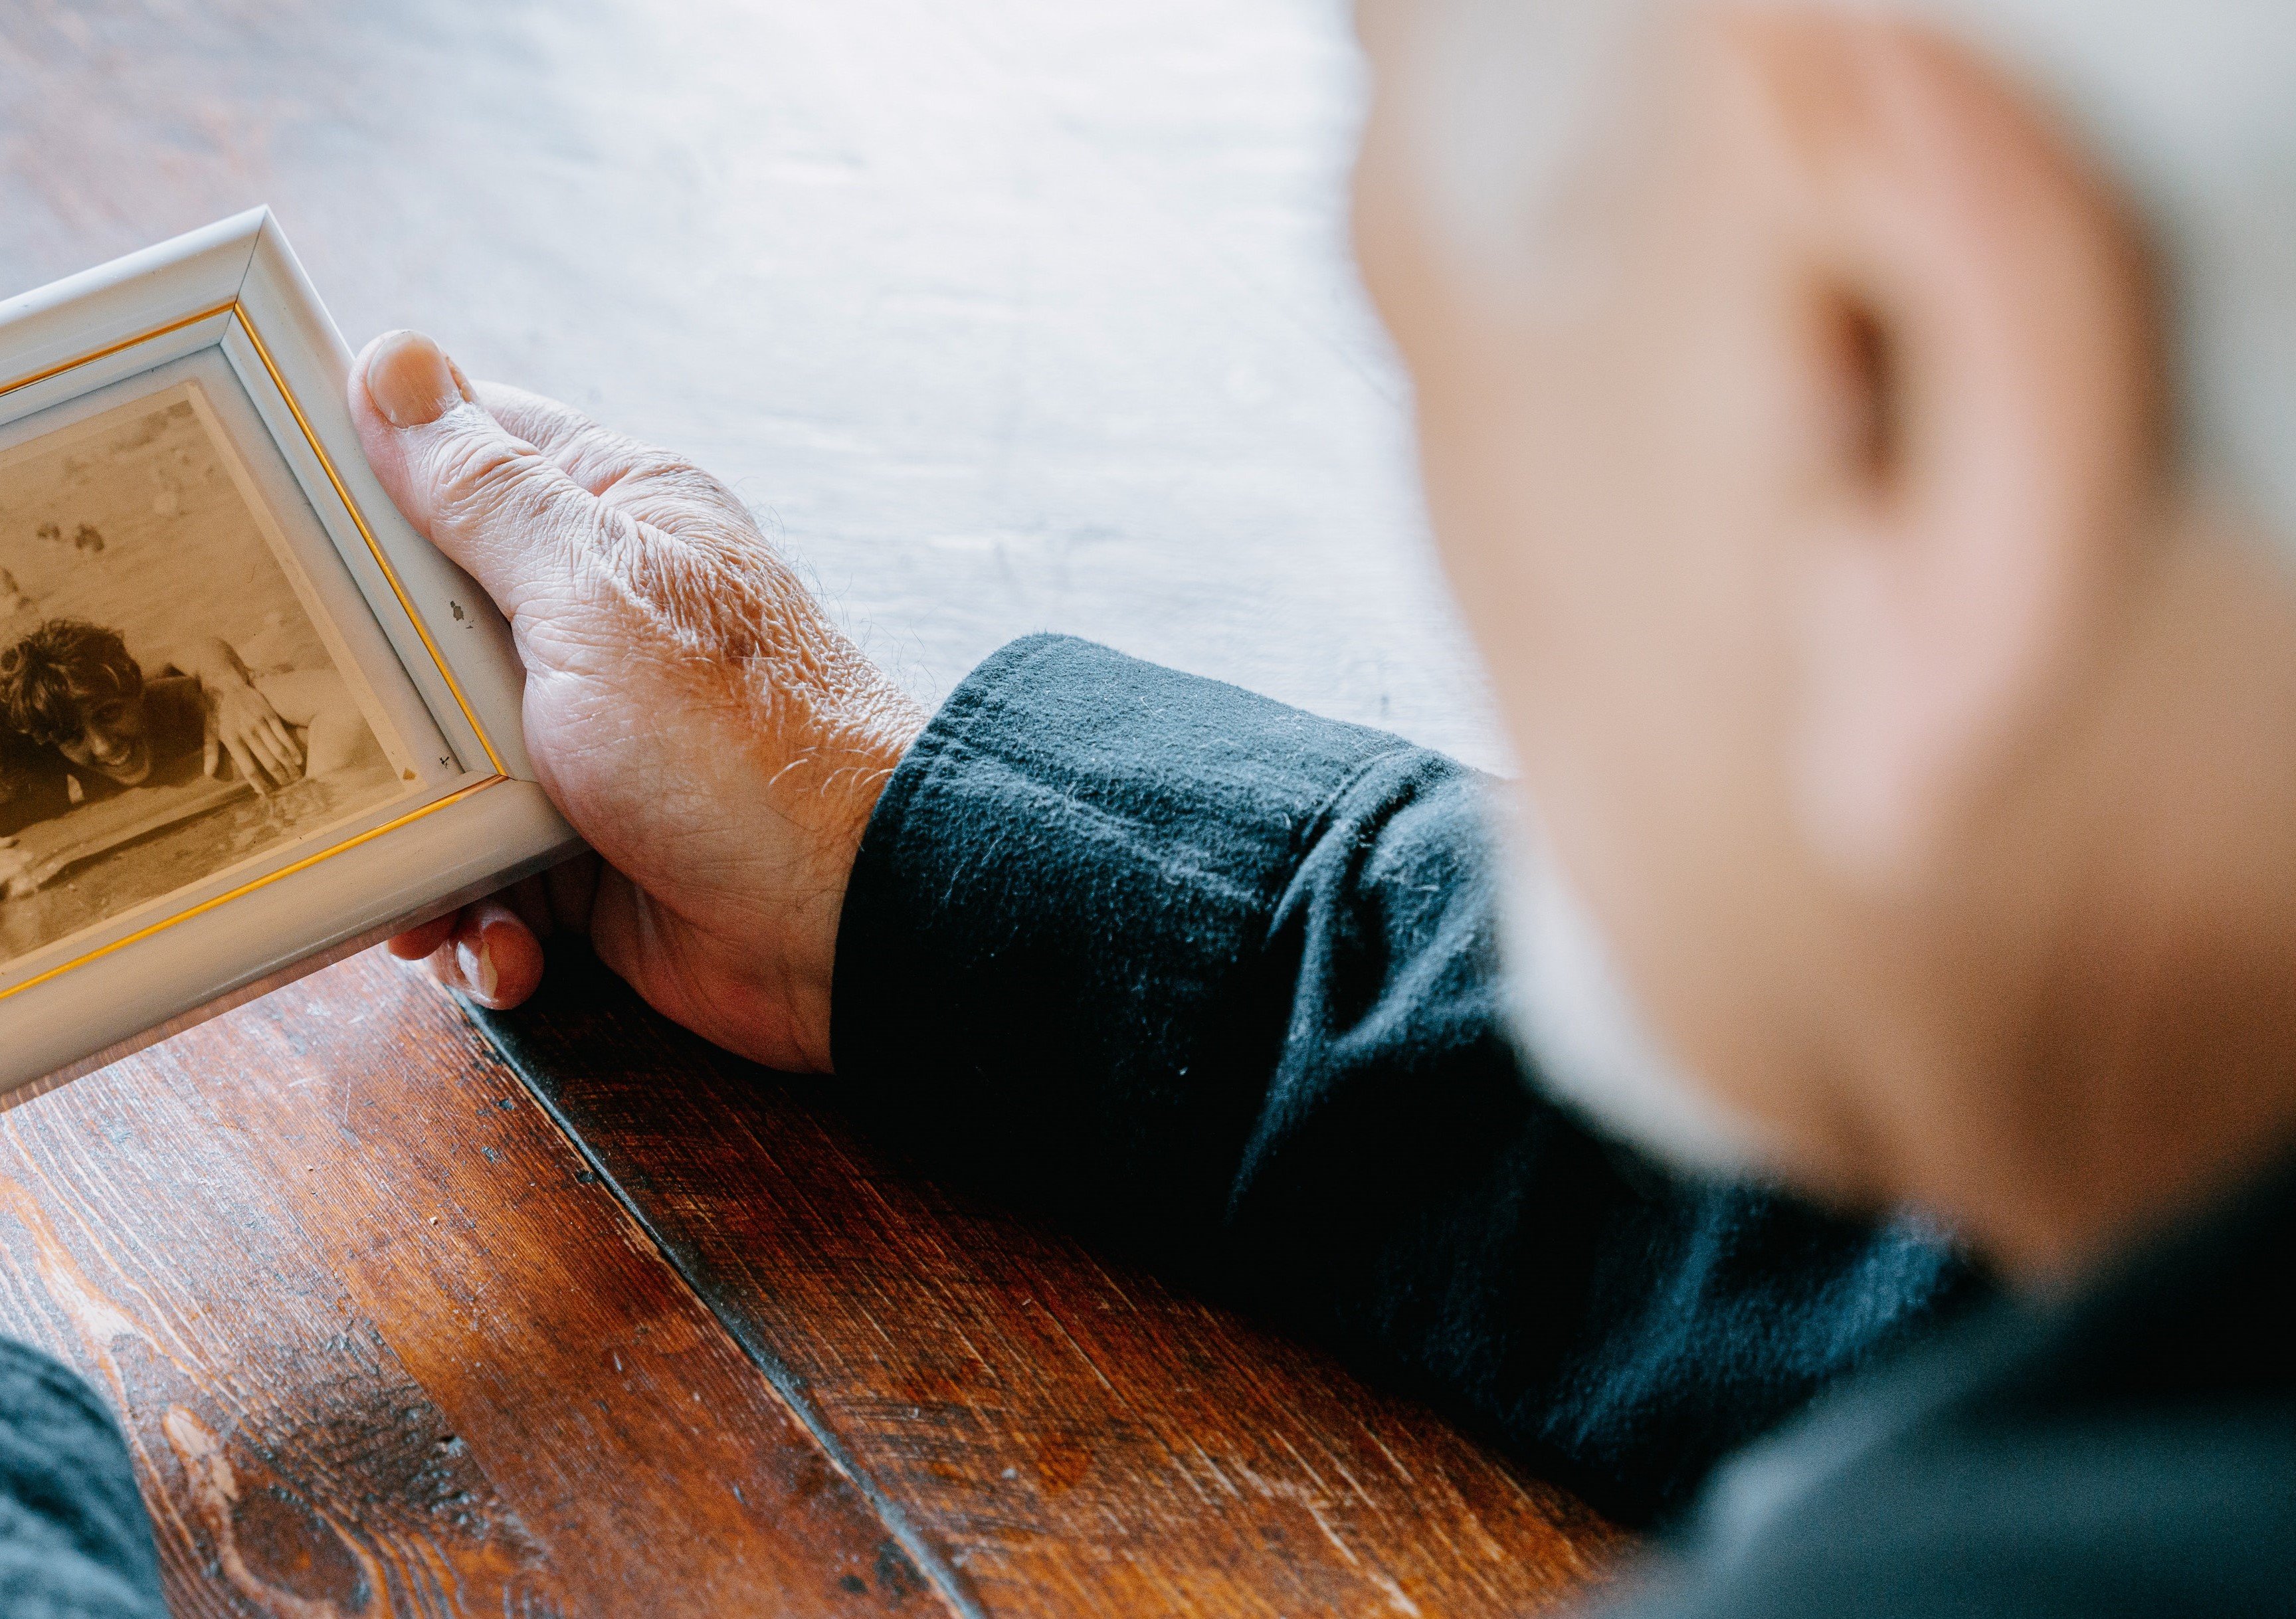 An elderly man holding a picture frame | Source: Pexels